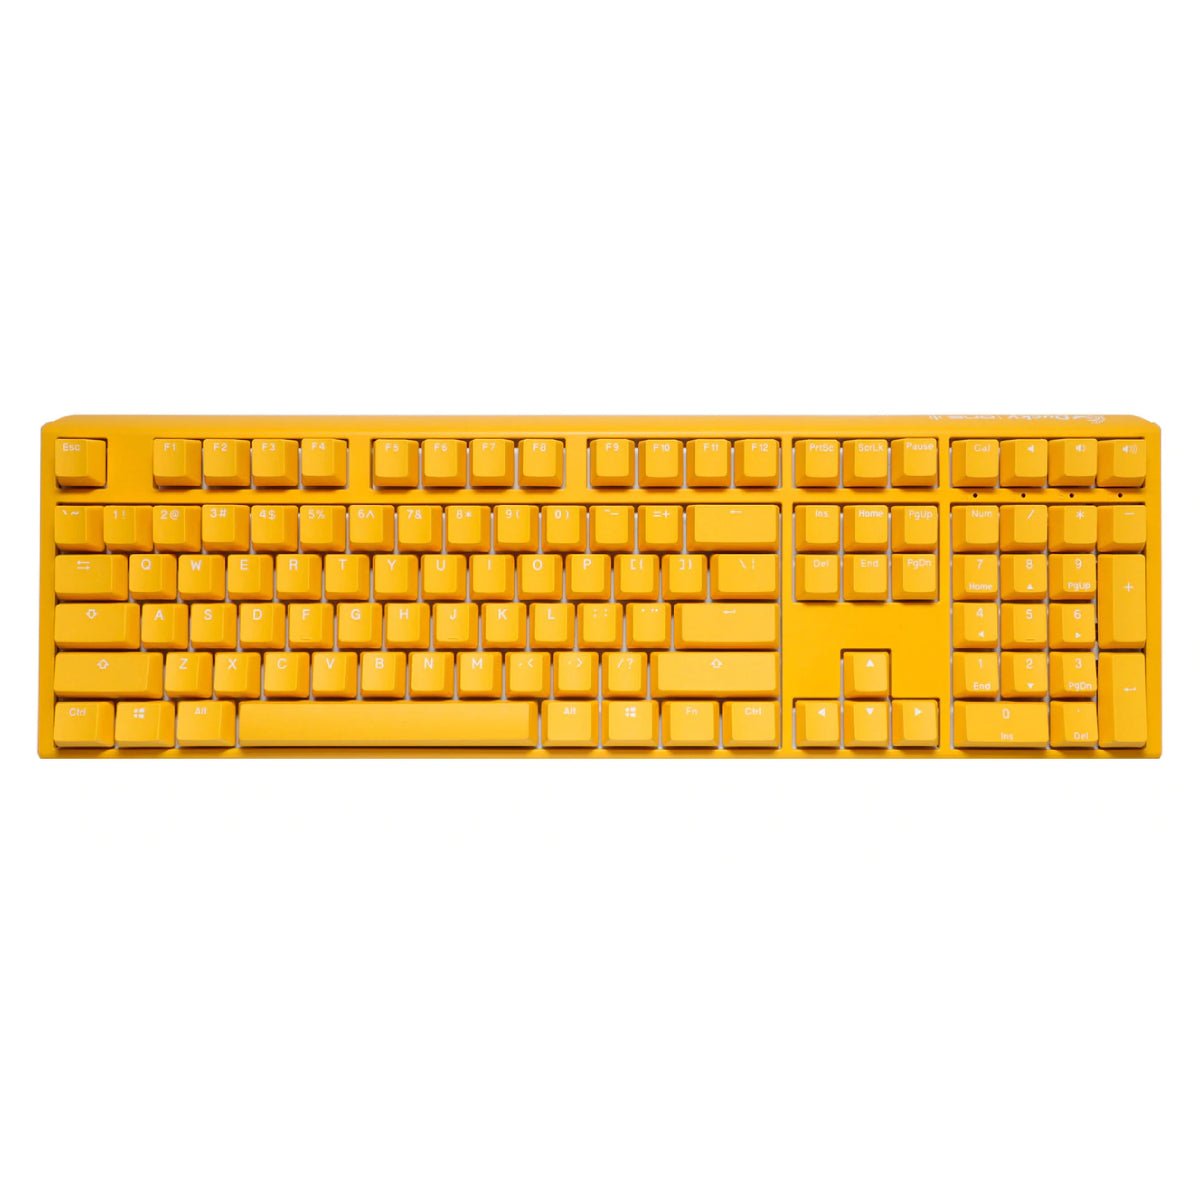 Ducky One 3 yellow Full Size Wired Mechanical Gaming Keyboard - Cherry Brown - لوحة مفاتيح - Store 974 | ستور ٩٧٤